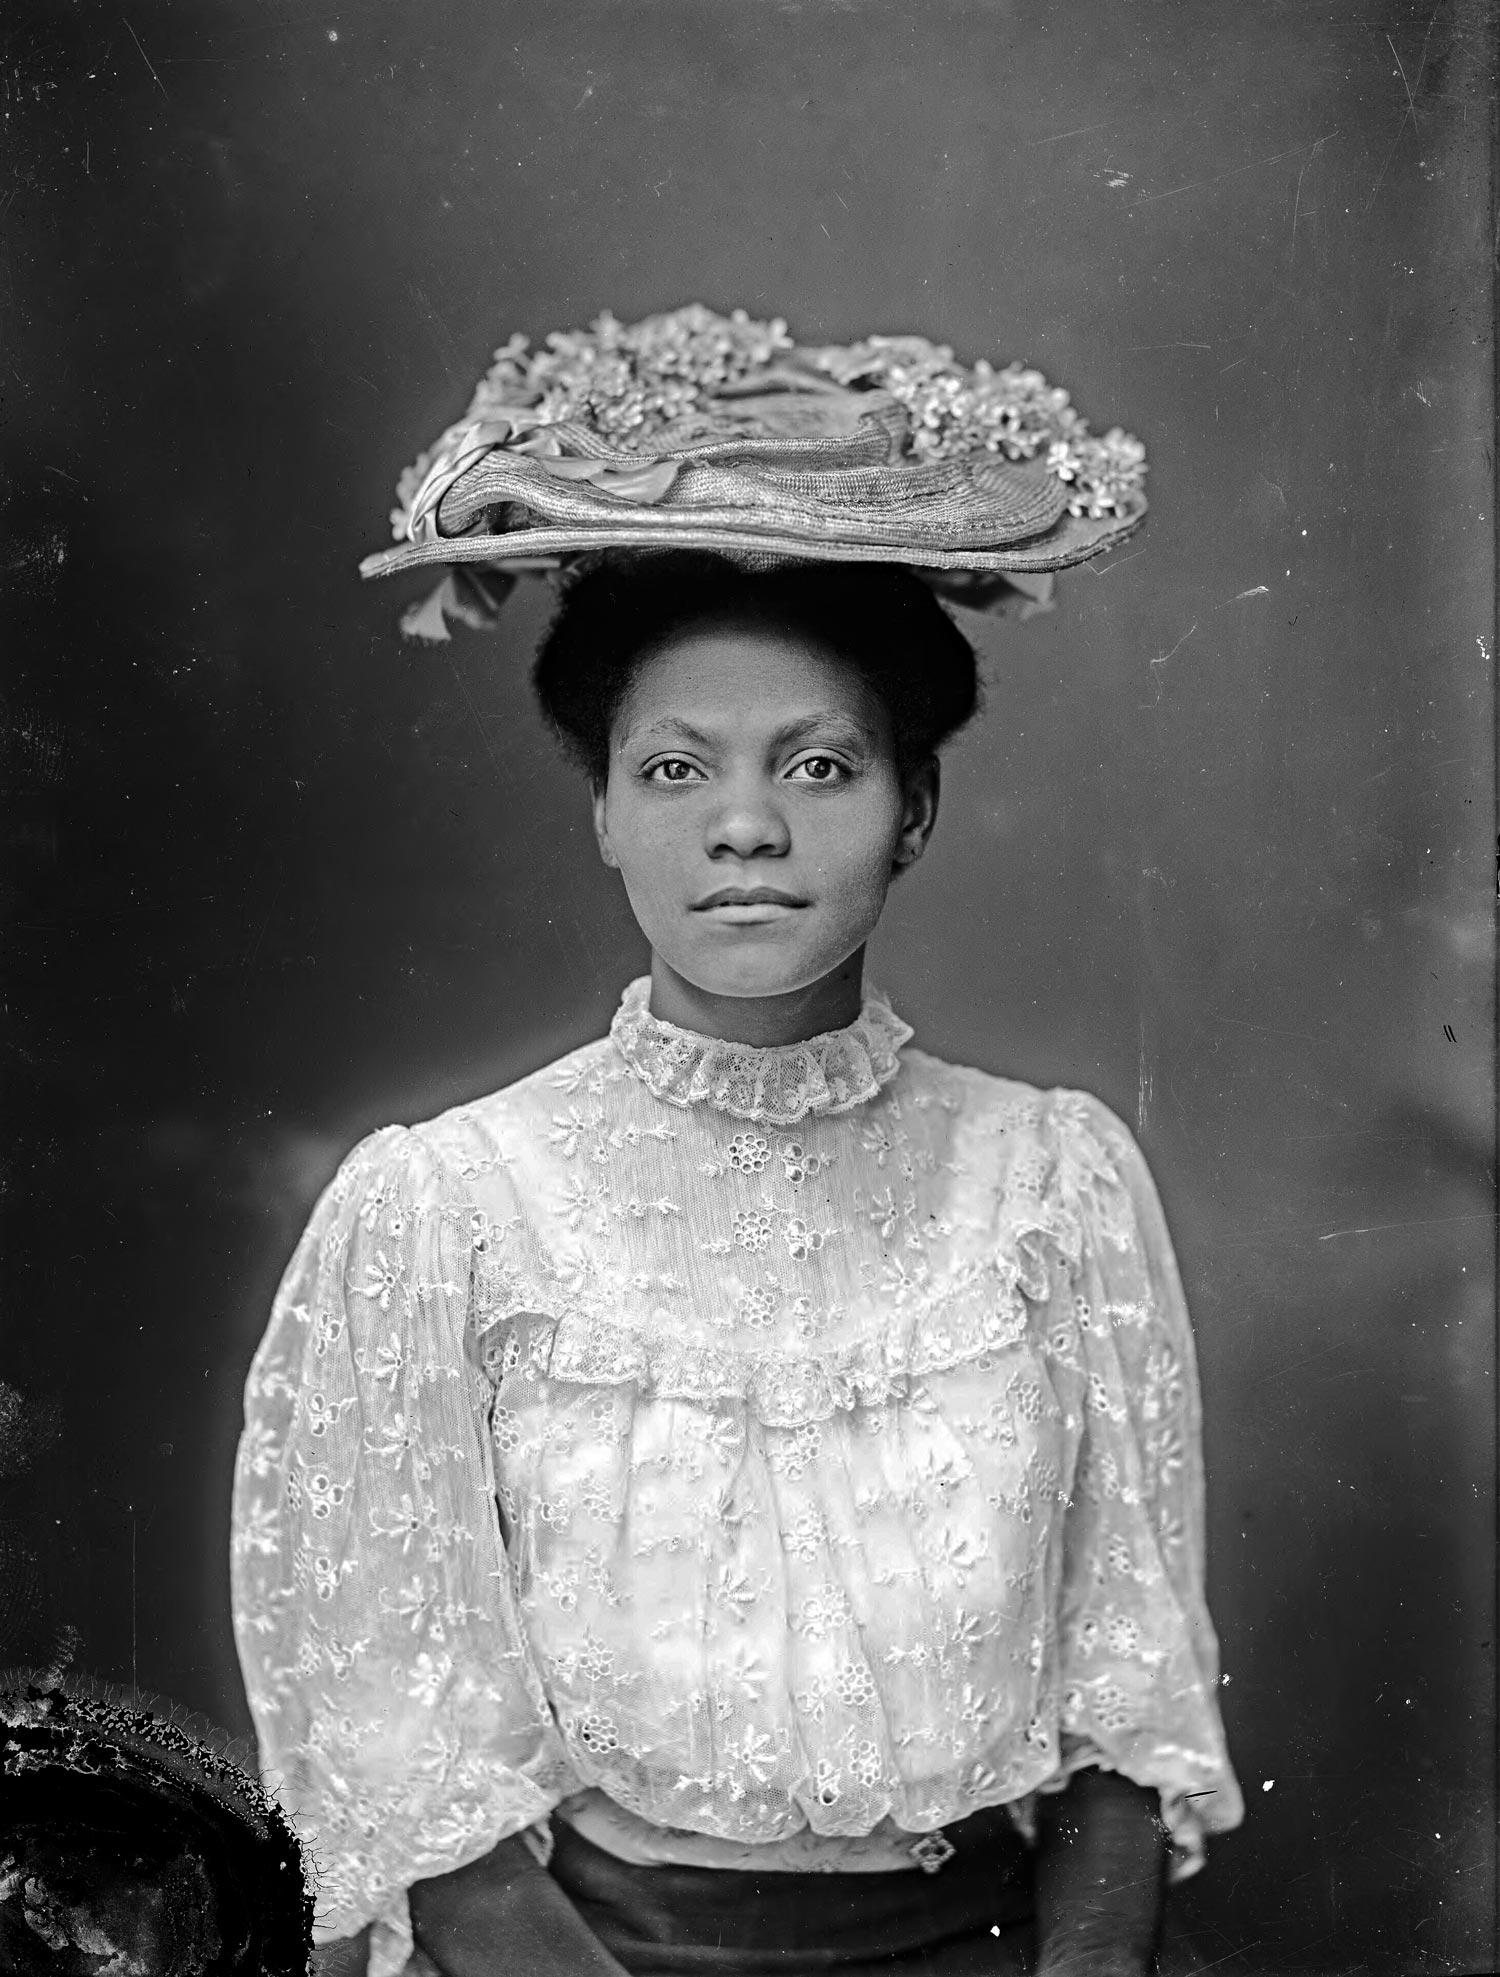 An unidentified woman black and white image